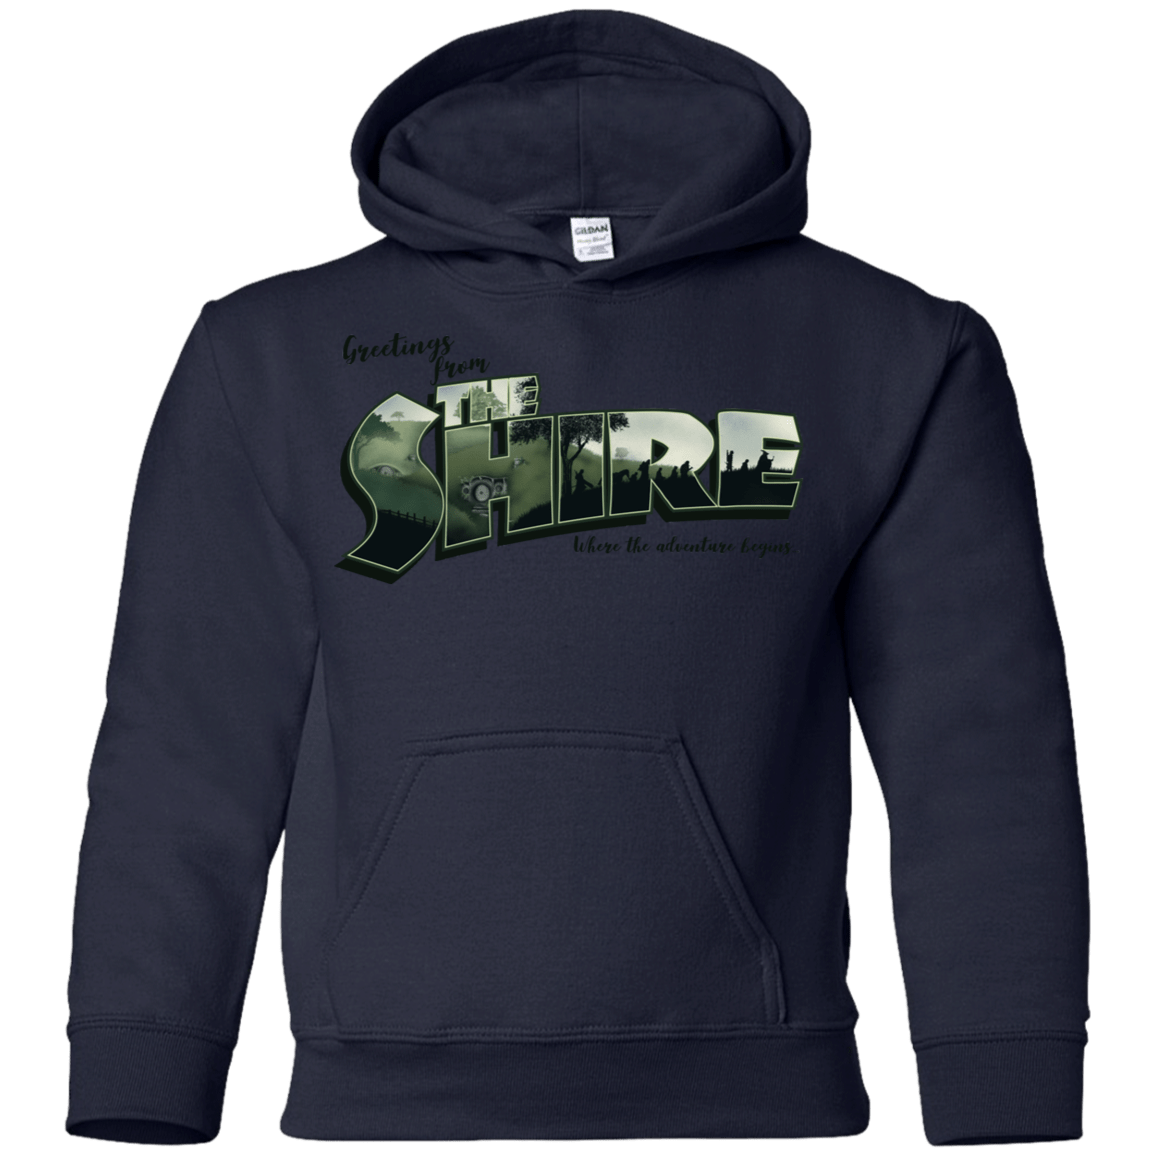 Sweatshirts Navy / YS Greetings from the Shire Youth Hoodie